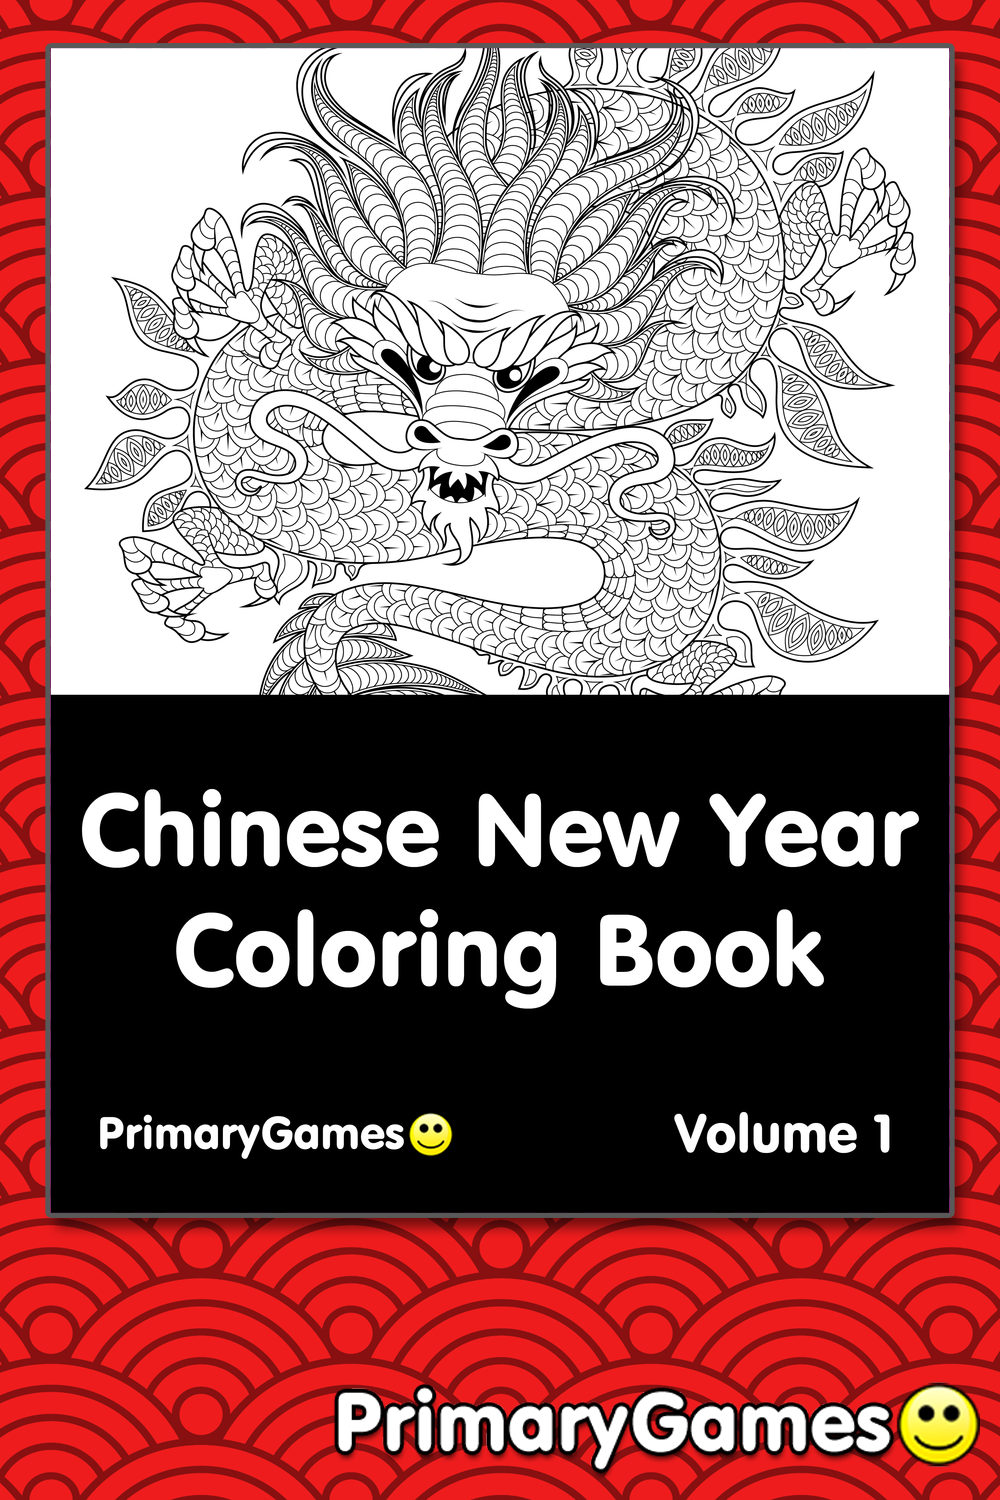 Download Chinese New Year Coloring eBook: Volume 1 • FREE Printable PDF from PrimaryGames